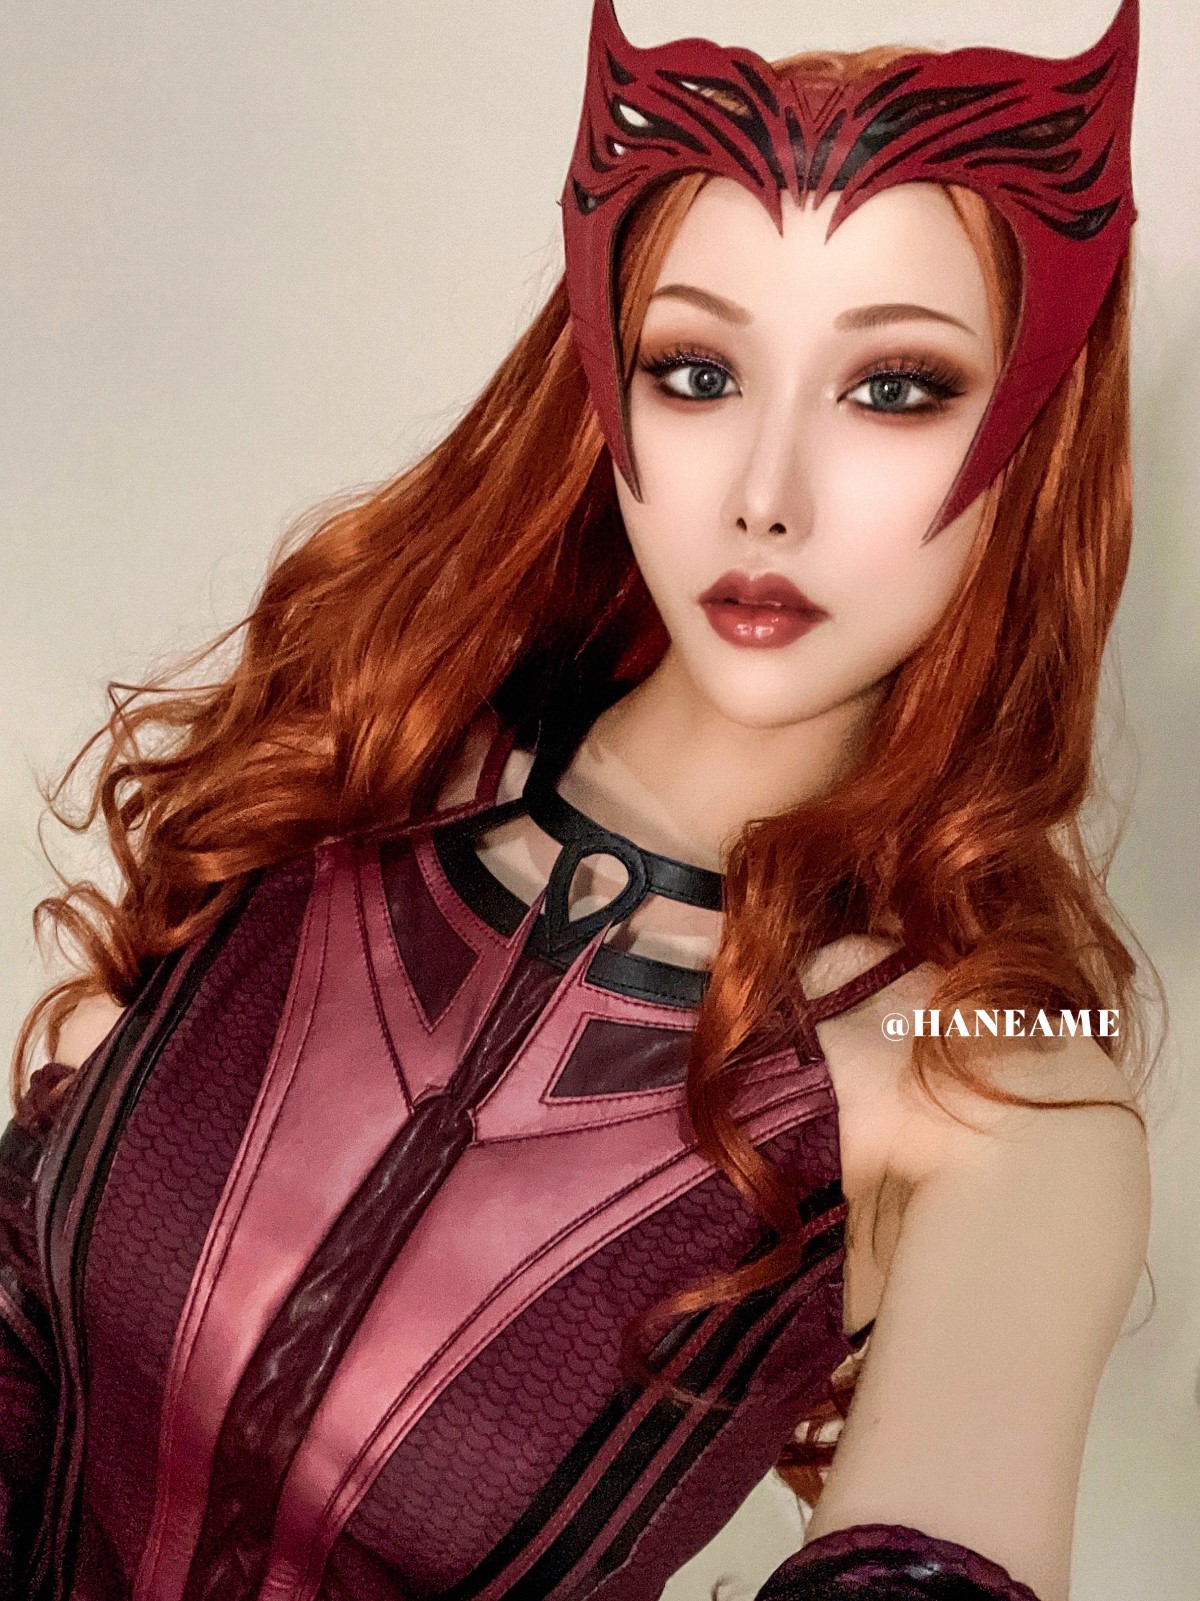 Coser@HaneAme Scarlet Witch 0038 6926555605.jpg